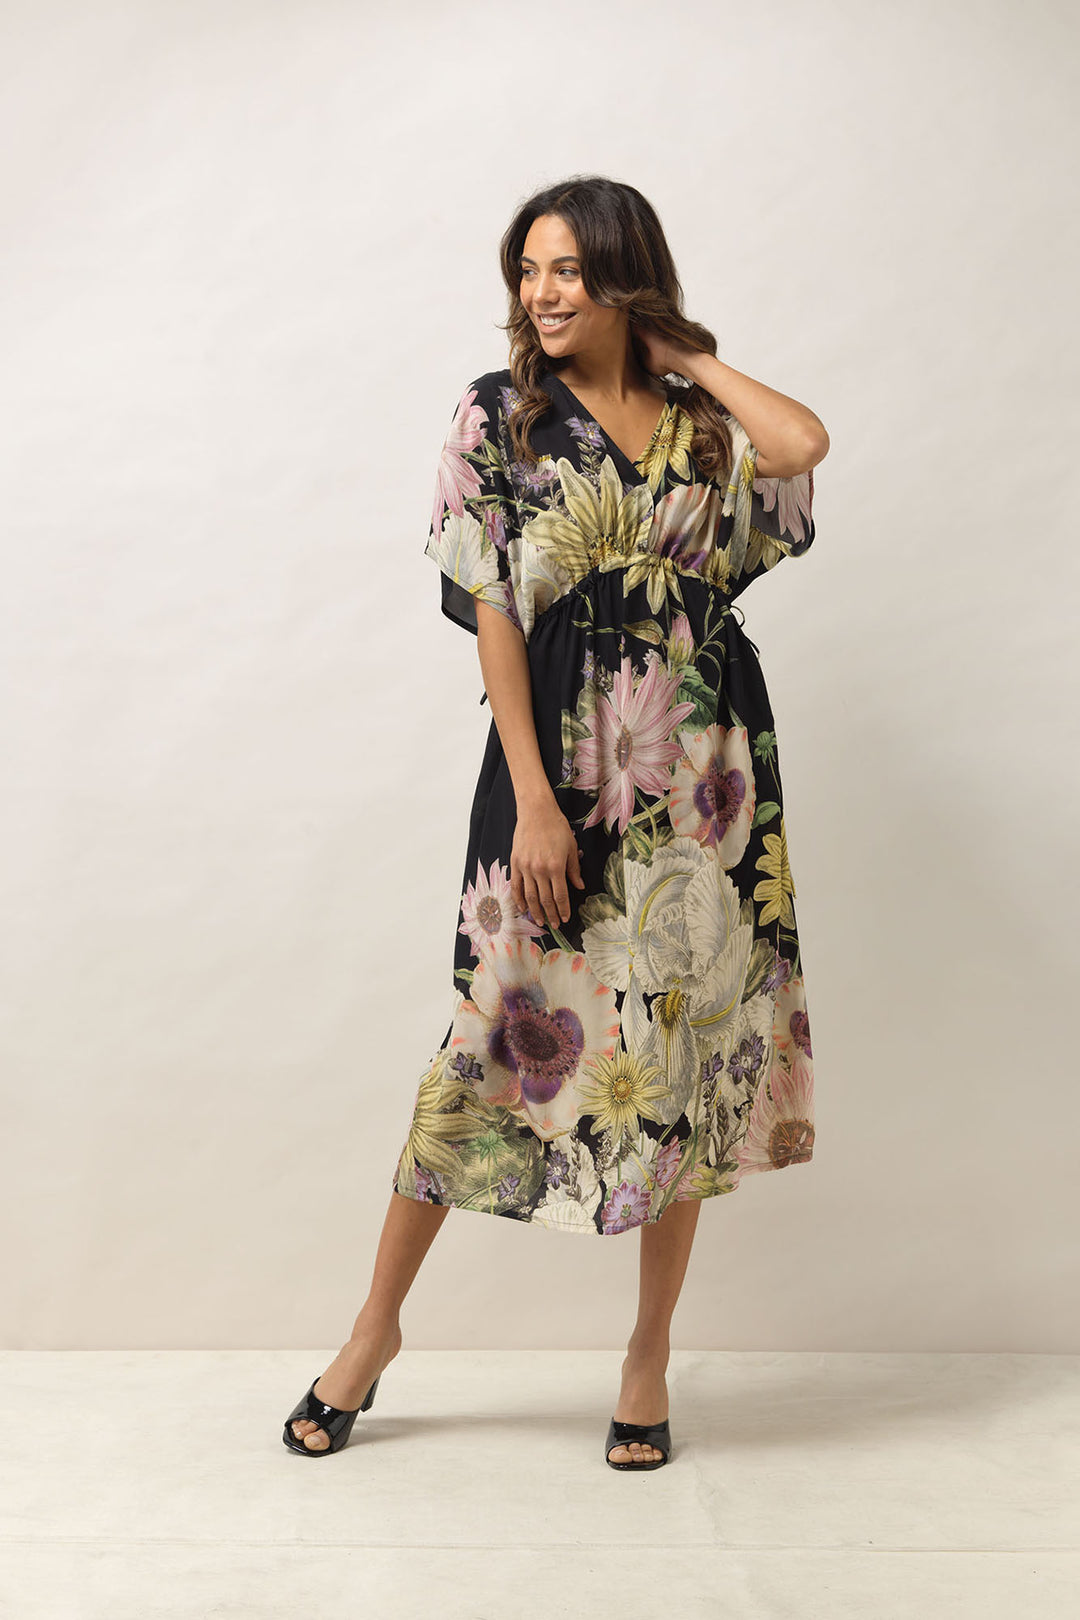 Women's lightweight beach cover up dress with tie waist. black with daisy floral print by One Hundred Stars